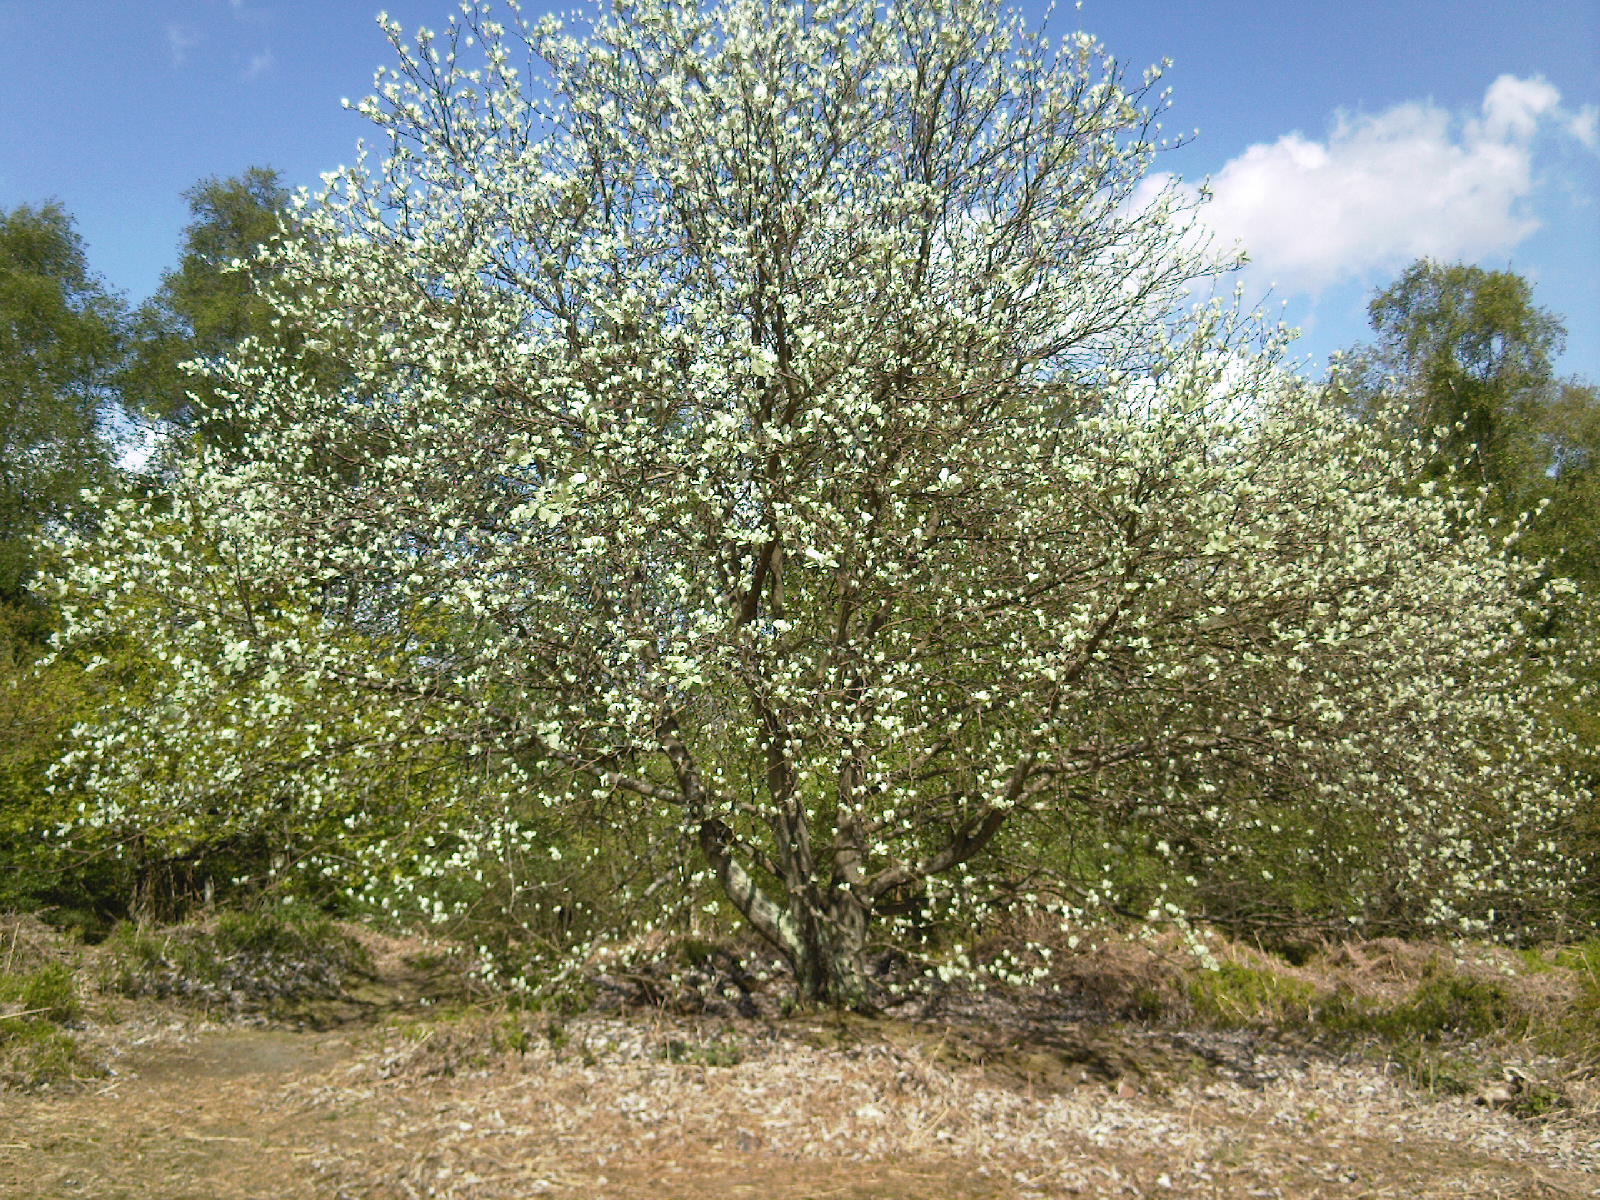 A large tree in early blossom on a sunny spring day in 2009.